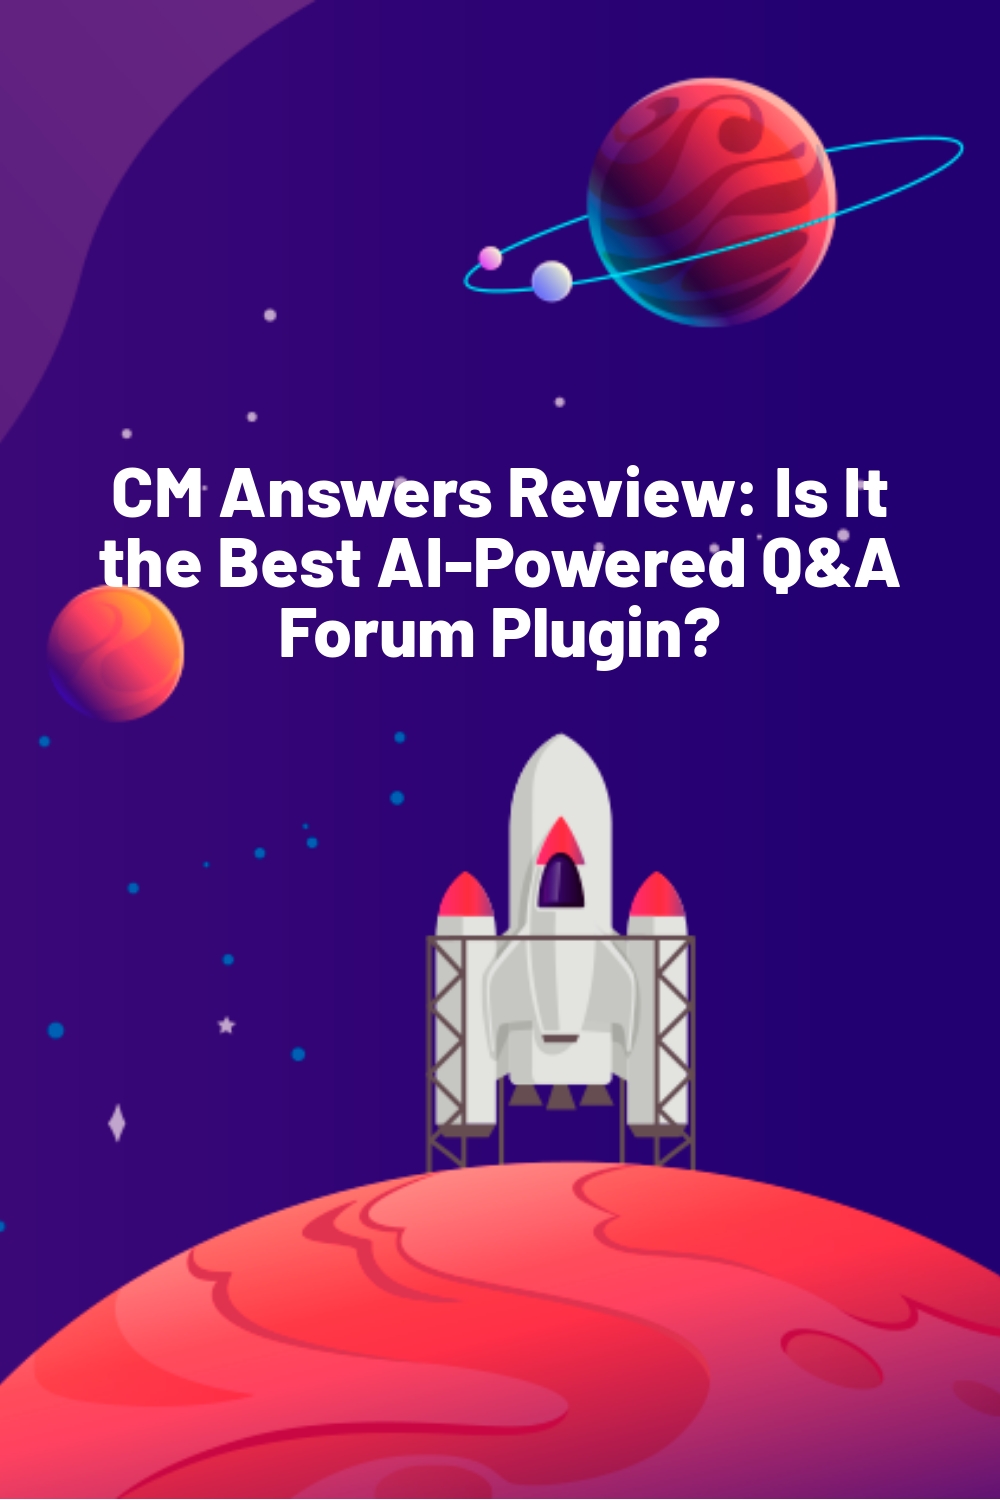 CM Answers Review: Is It the Best AI-Powered Q&A Forum Plugin?